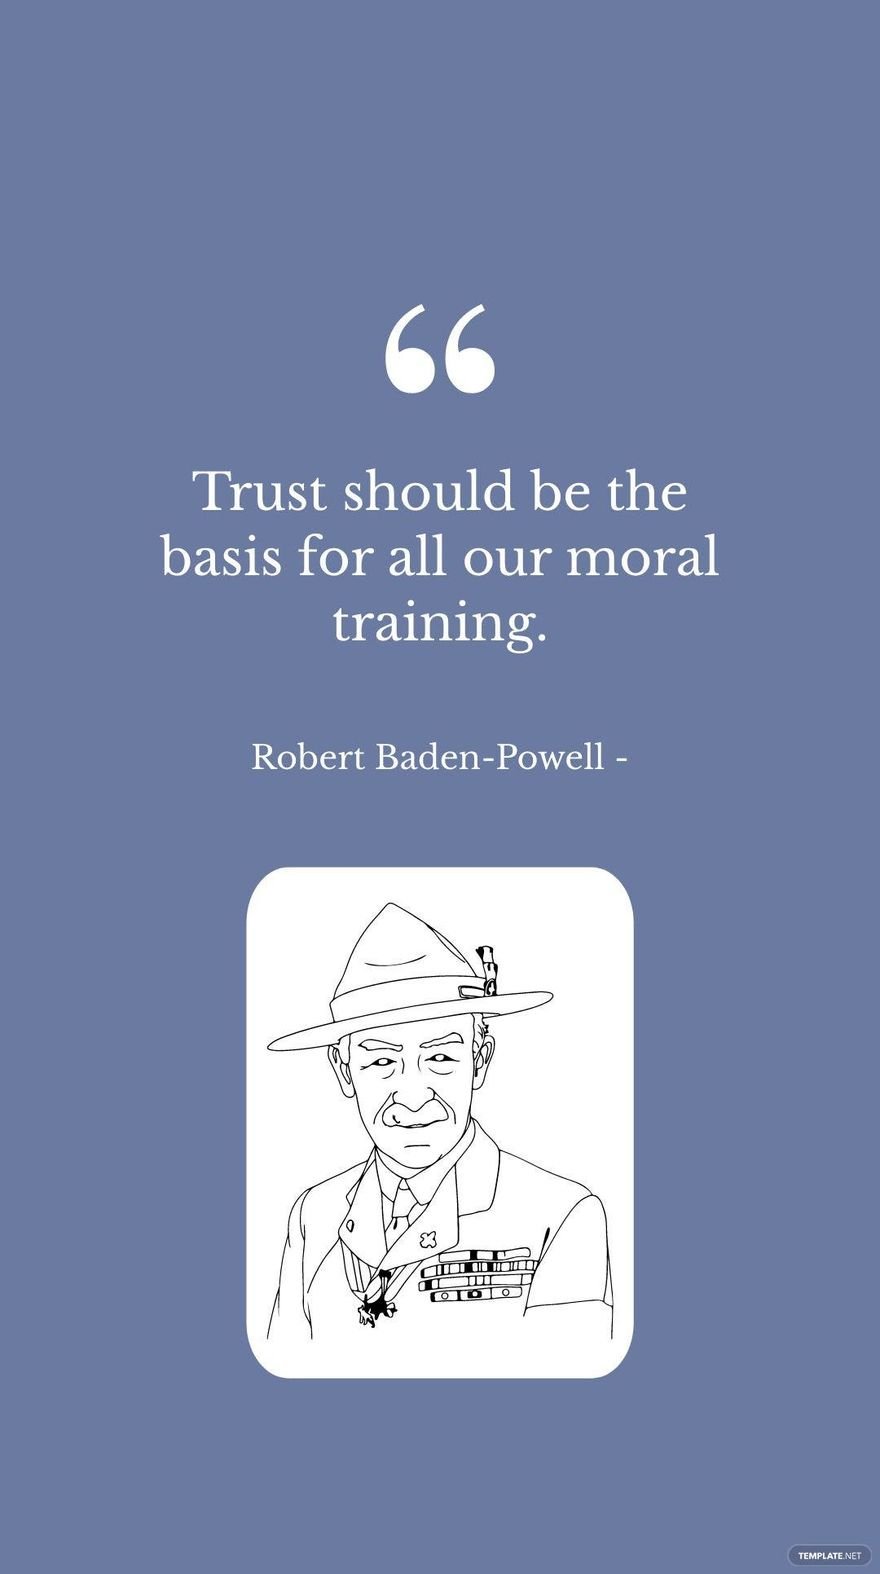 Robert Baden-Powell - Trust should be the basis for all our moral training. in JPG